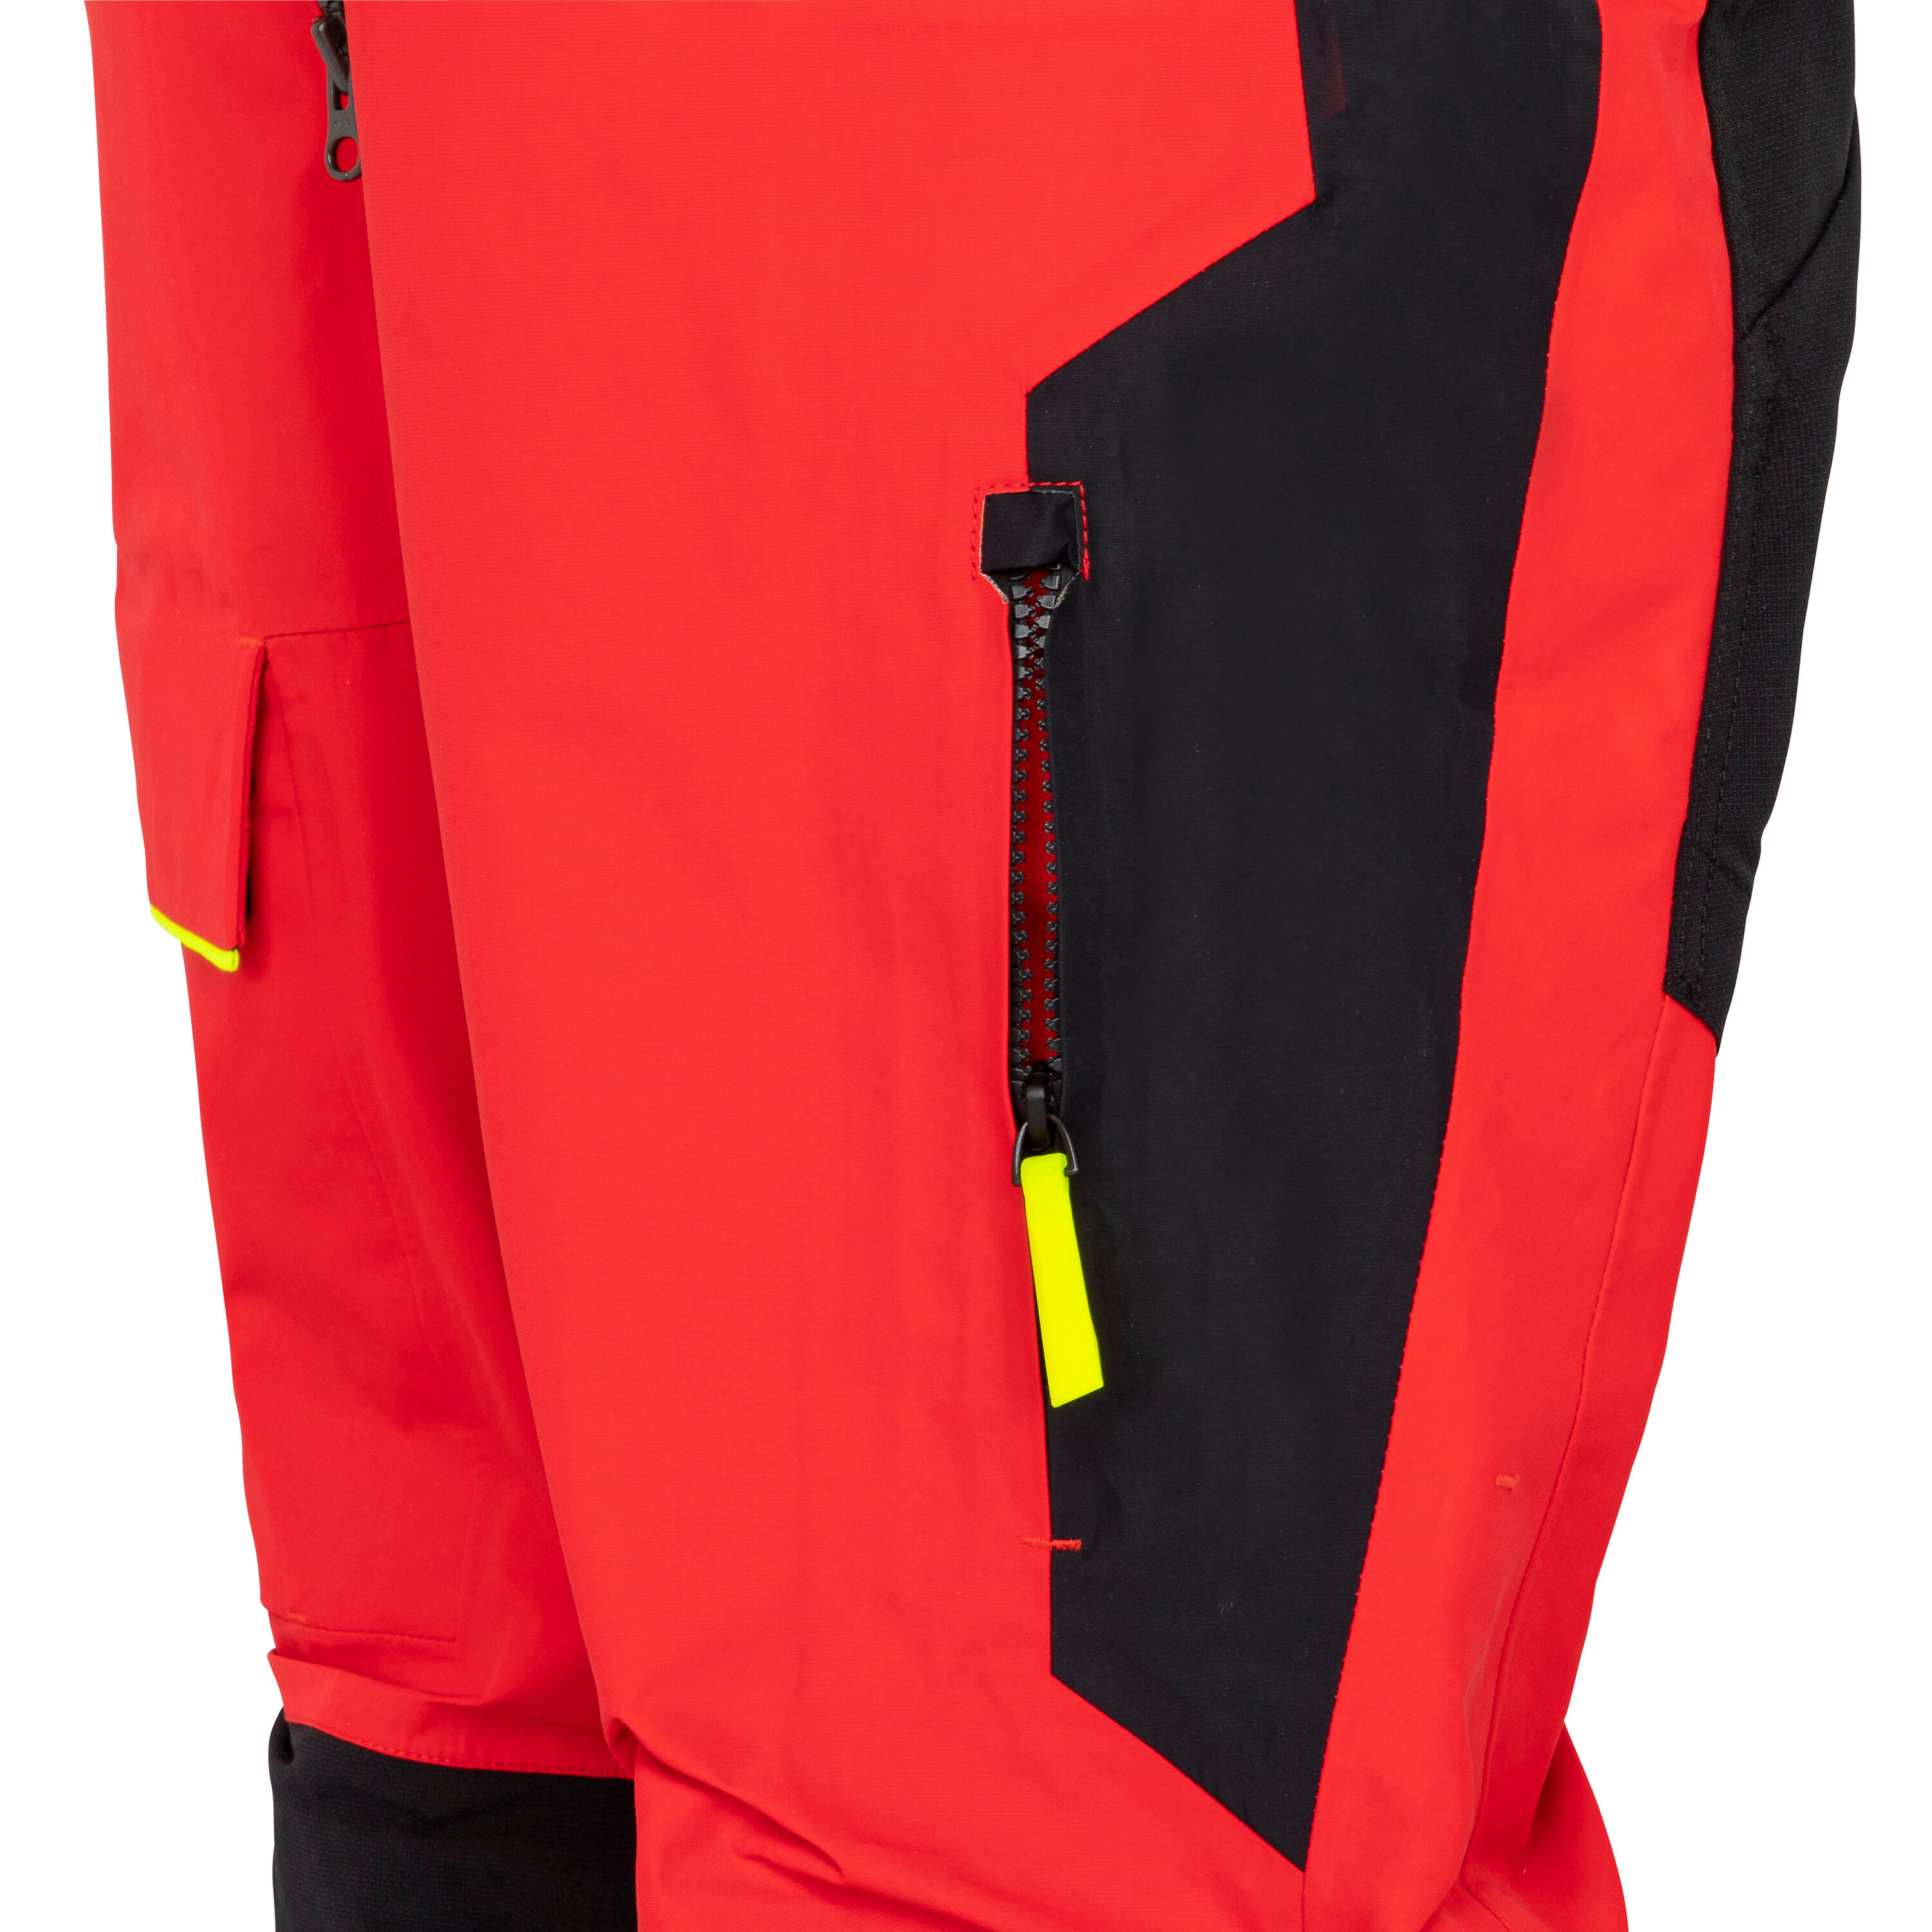 Adult Sailing overalls - Offshore 900 OPEN dropseat red 13/16